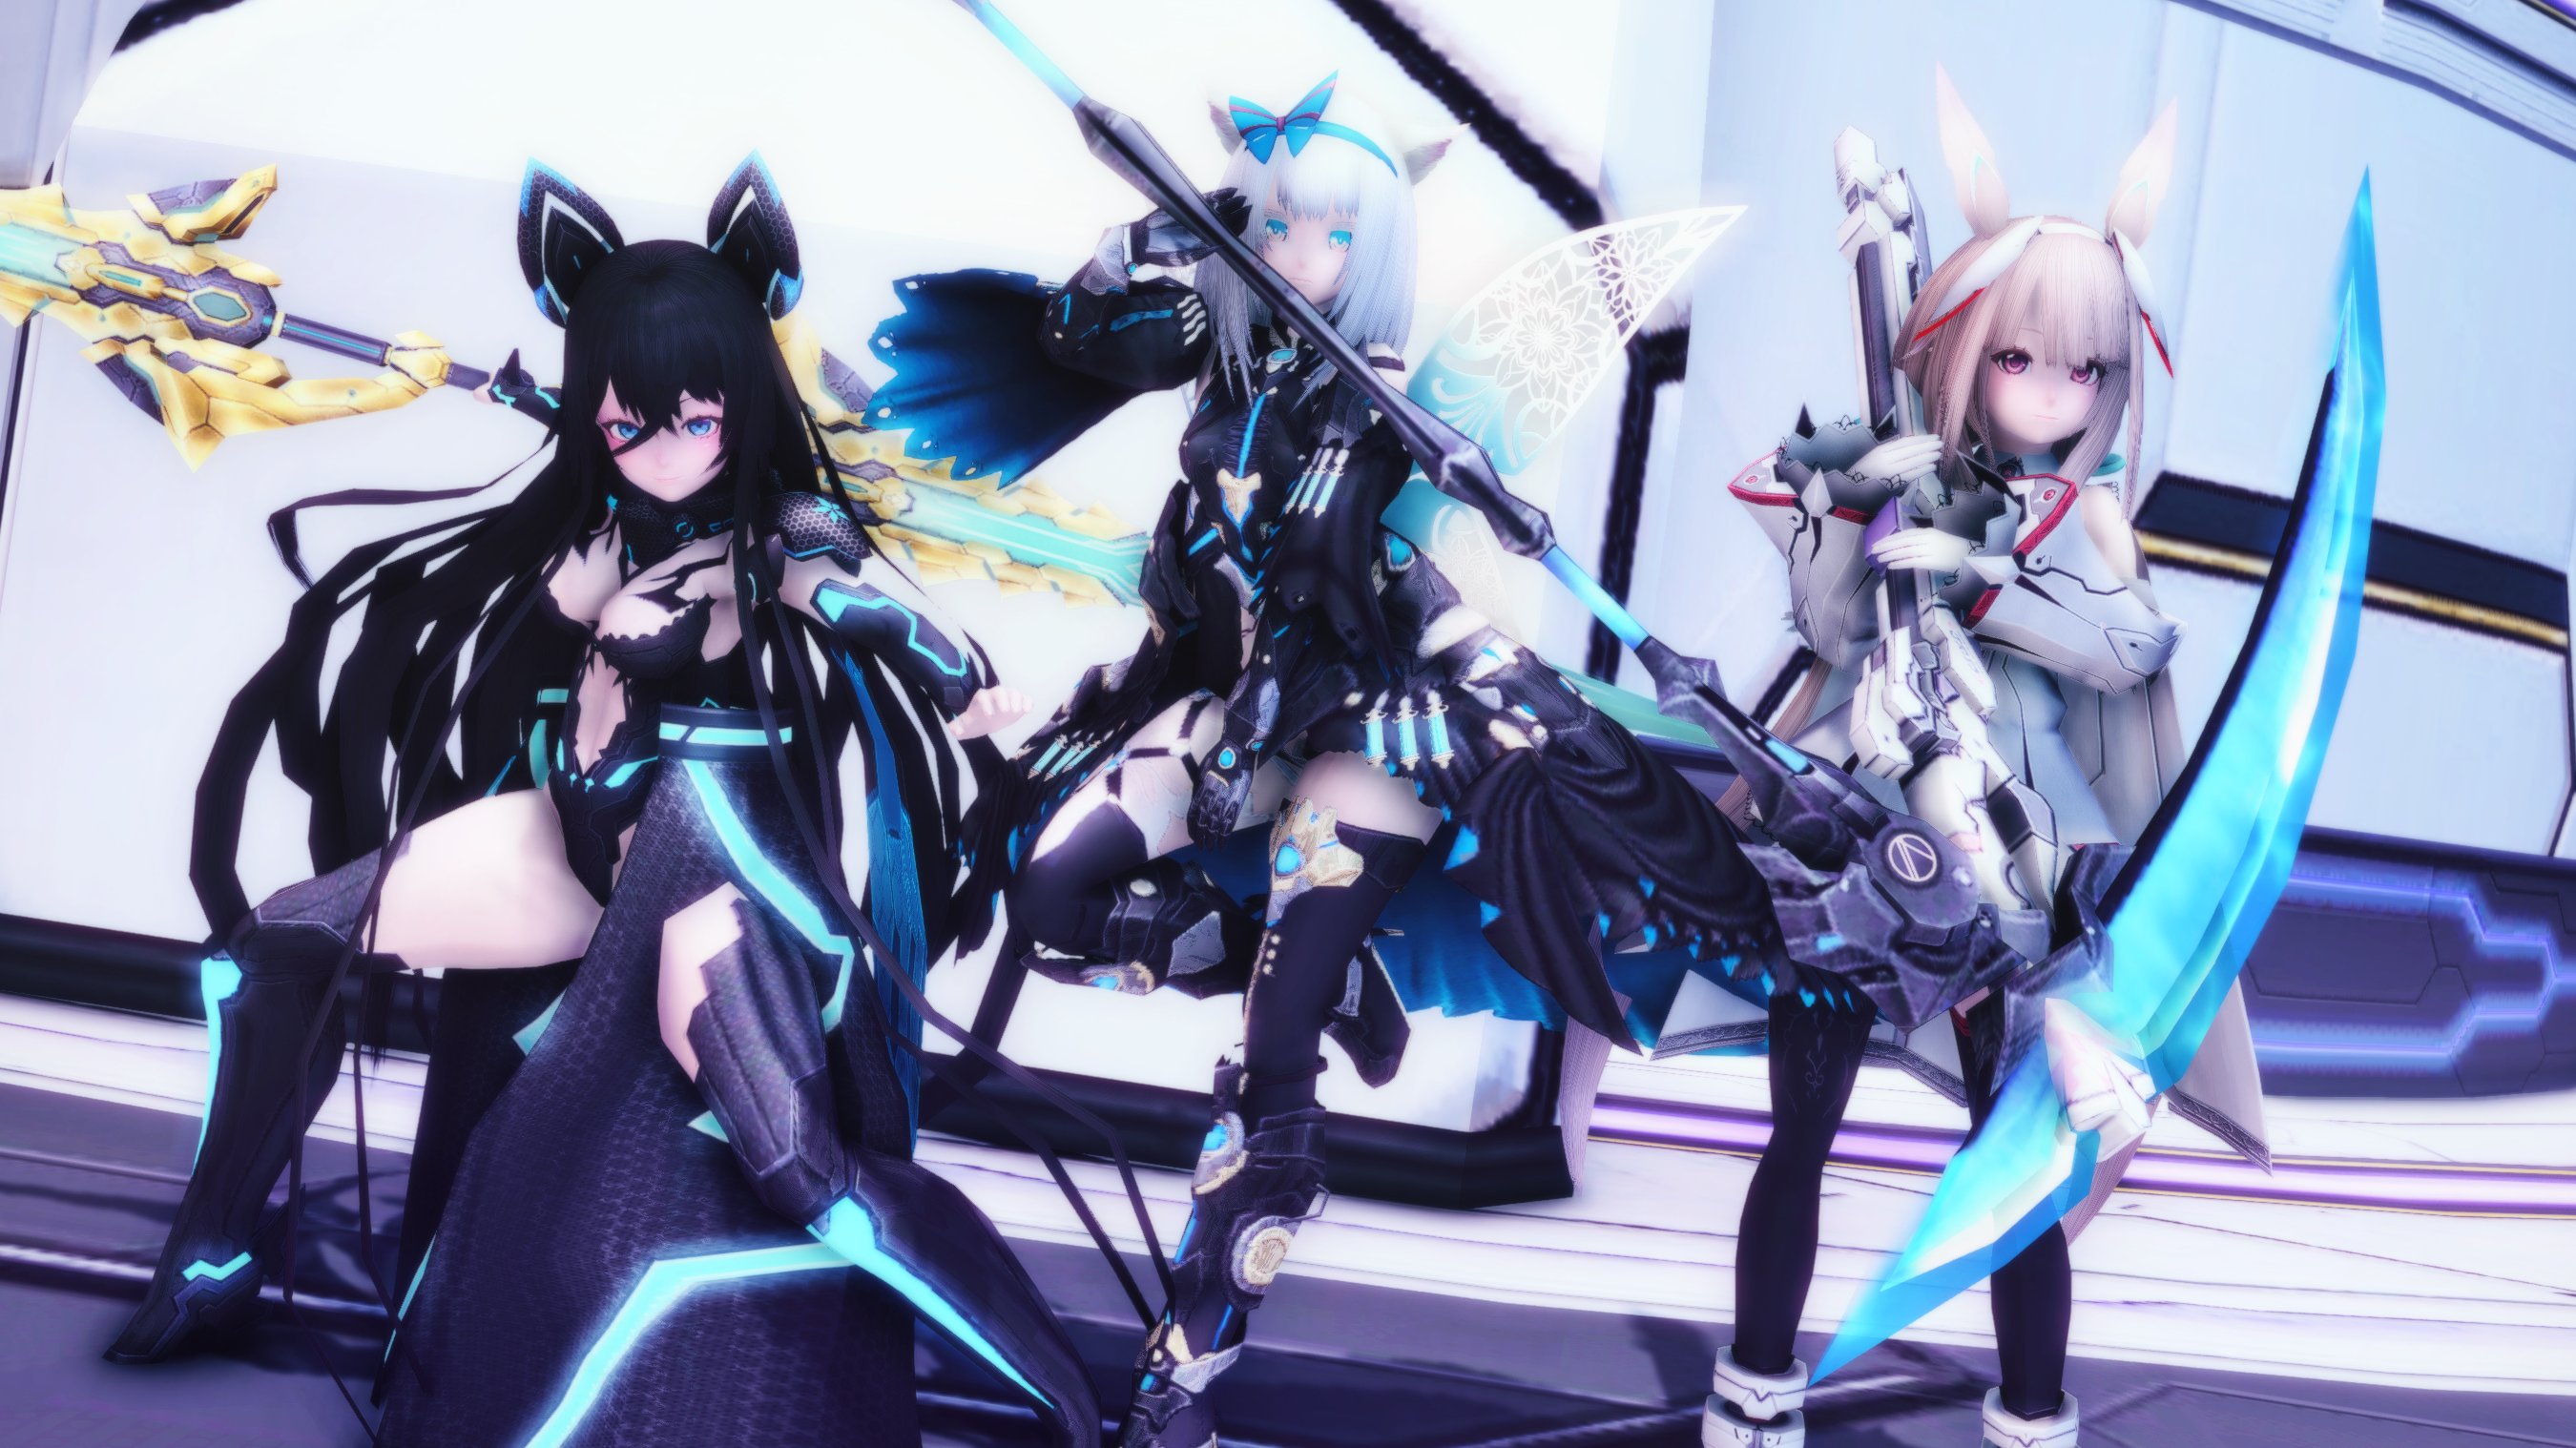 Phantasy Star Online 2 Confirms Steam Release And Global Launch